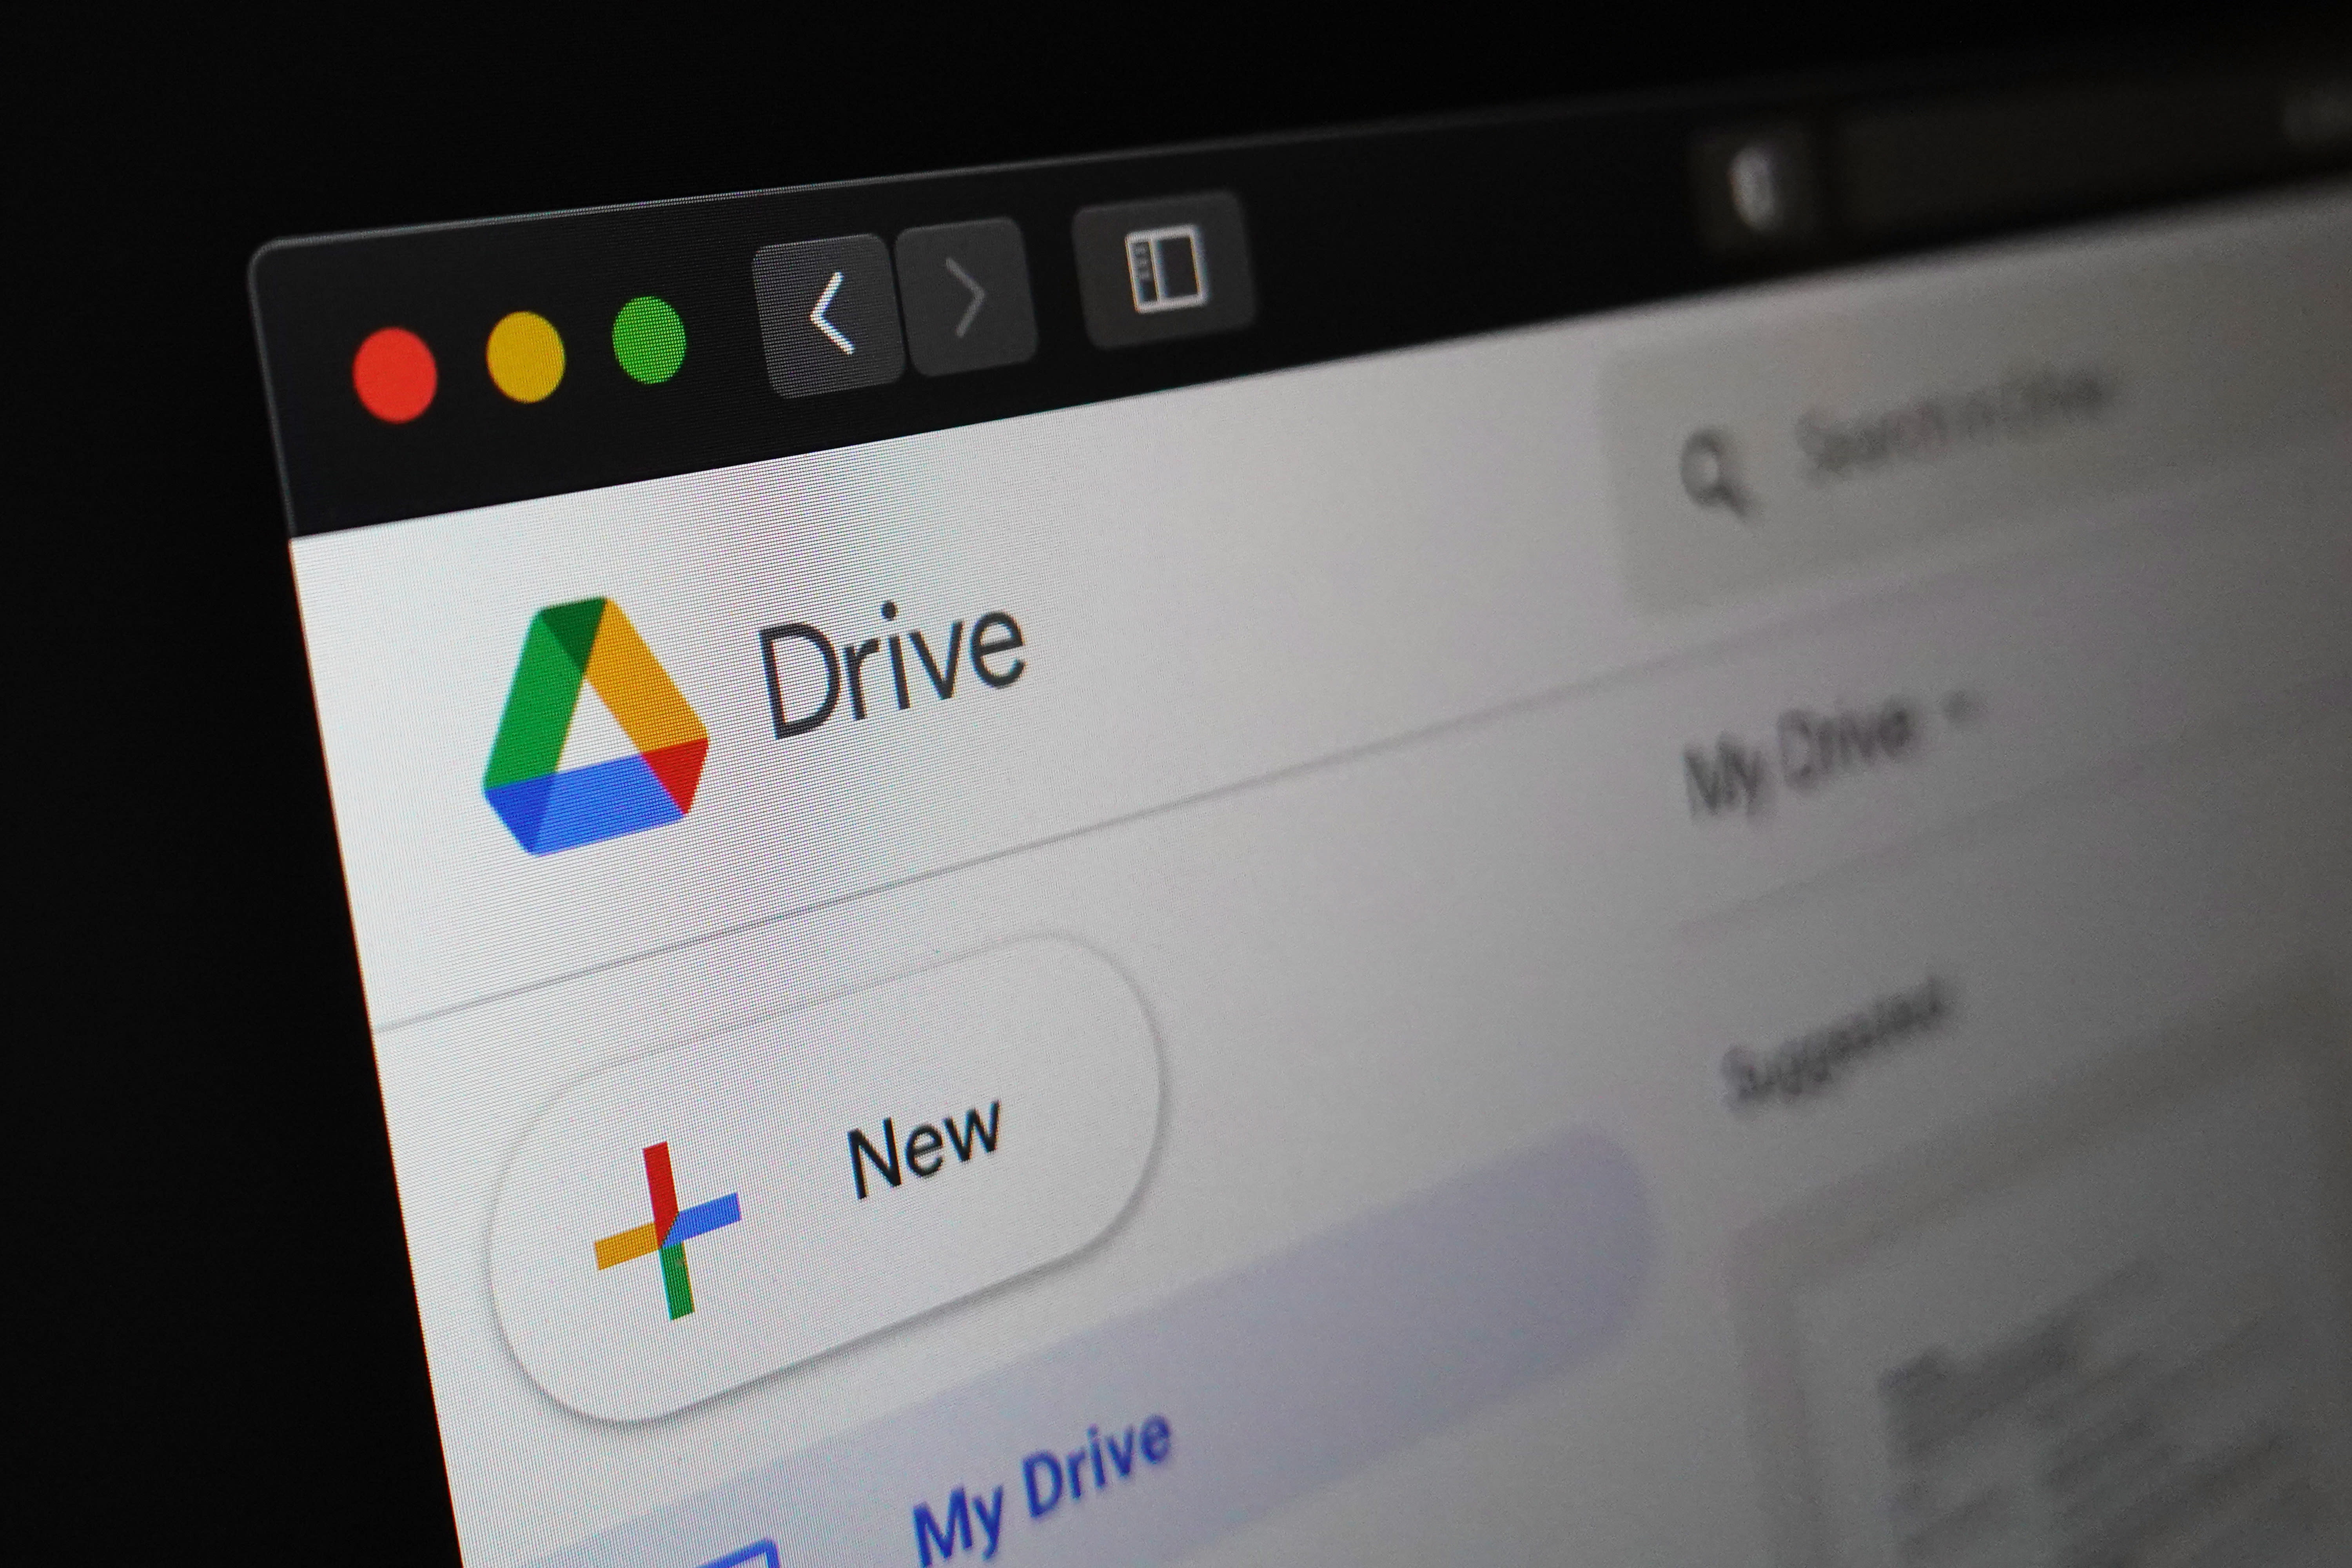 Man fined S$5,000 for deleting documents from employer’s Google Drive account after being fired